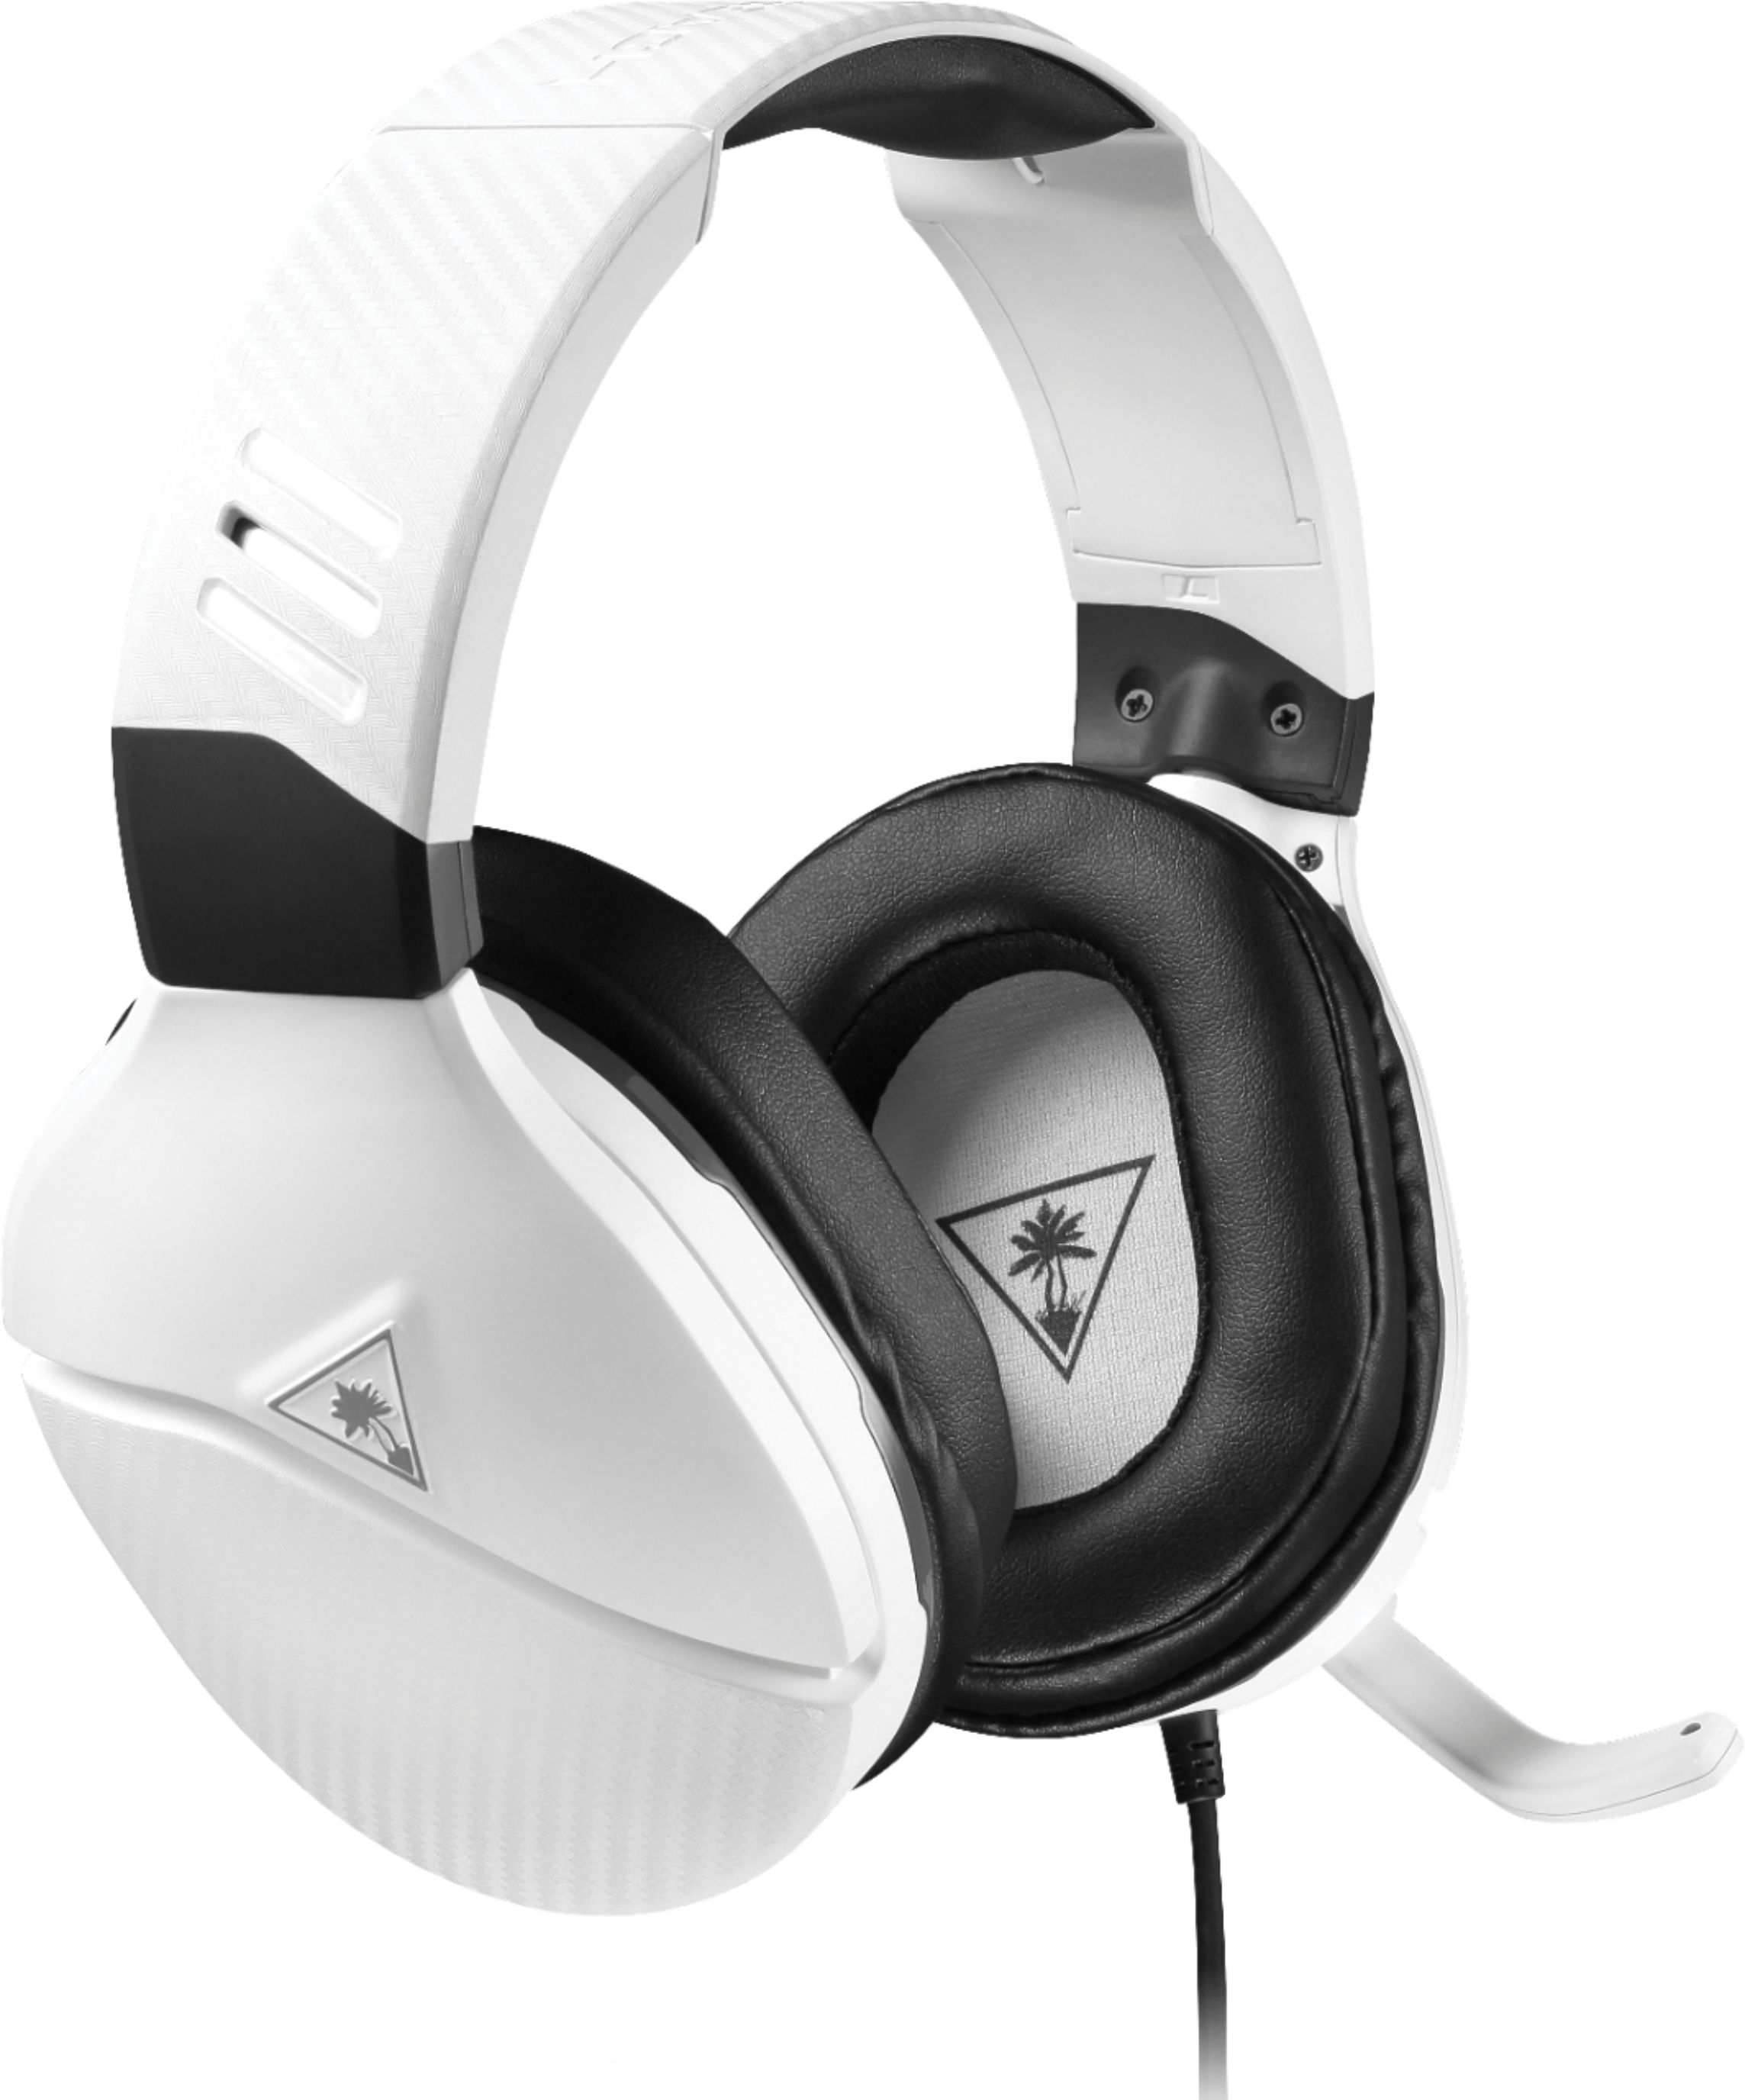 can playstation headphones work on xbox